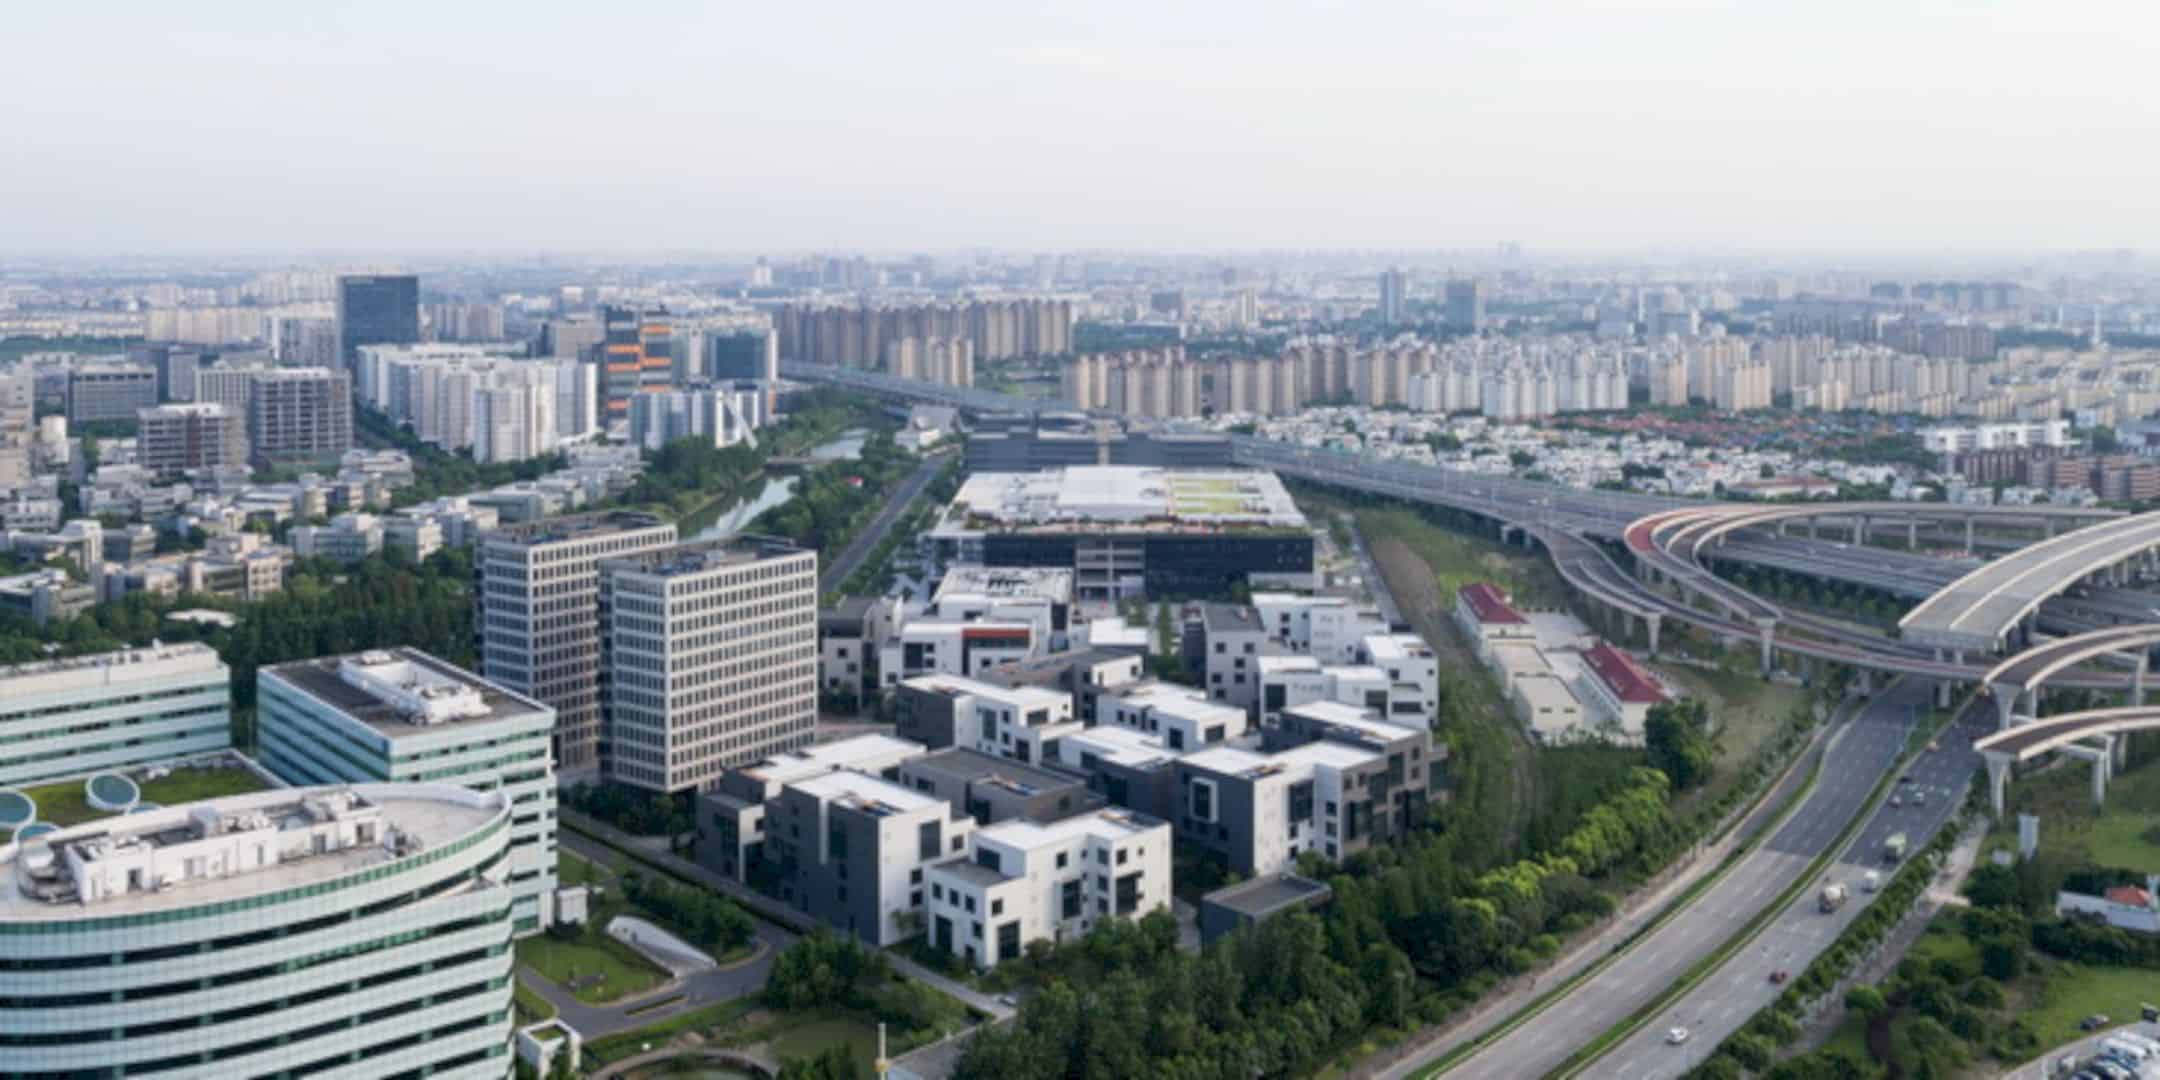 Zhangjiang Ic Harbour Phase Iii An Office Park That Formulates A Network Of Public Space 6